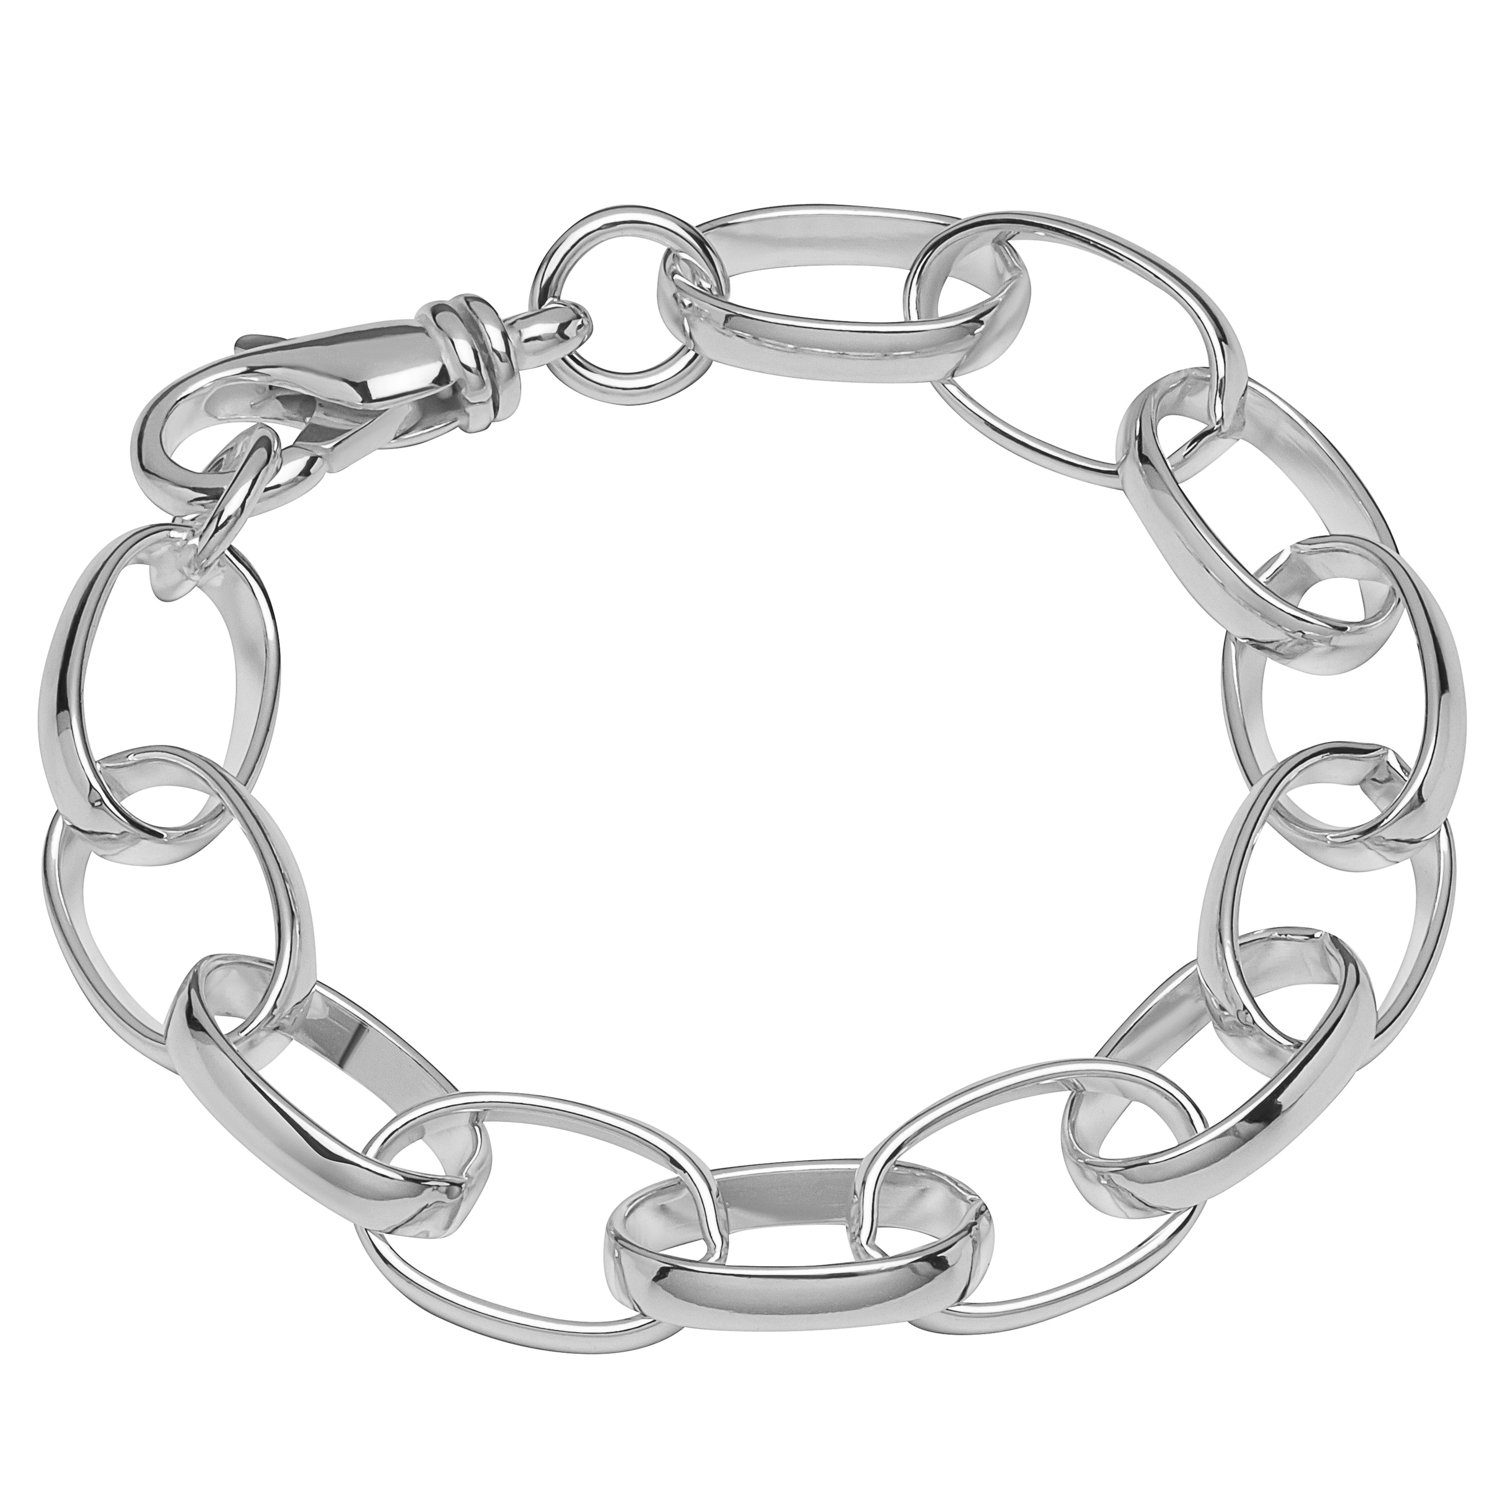 NKlaus Silberarmband Armband 925 Sterling Silber 22cm Erbskette oval Un (1 Stück), Made in Germany